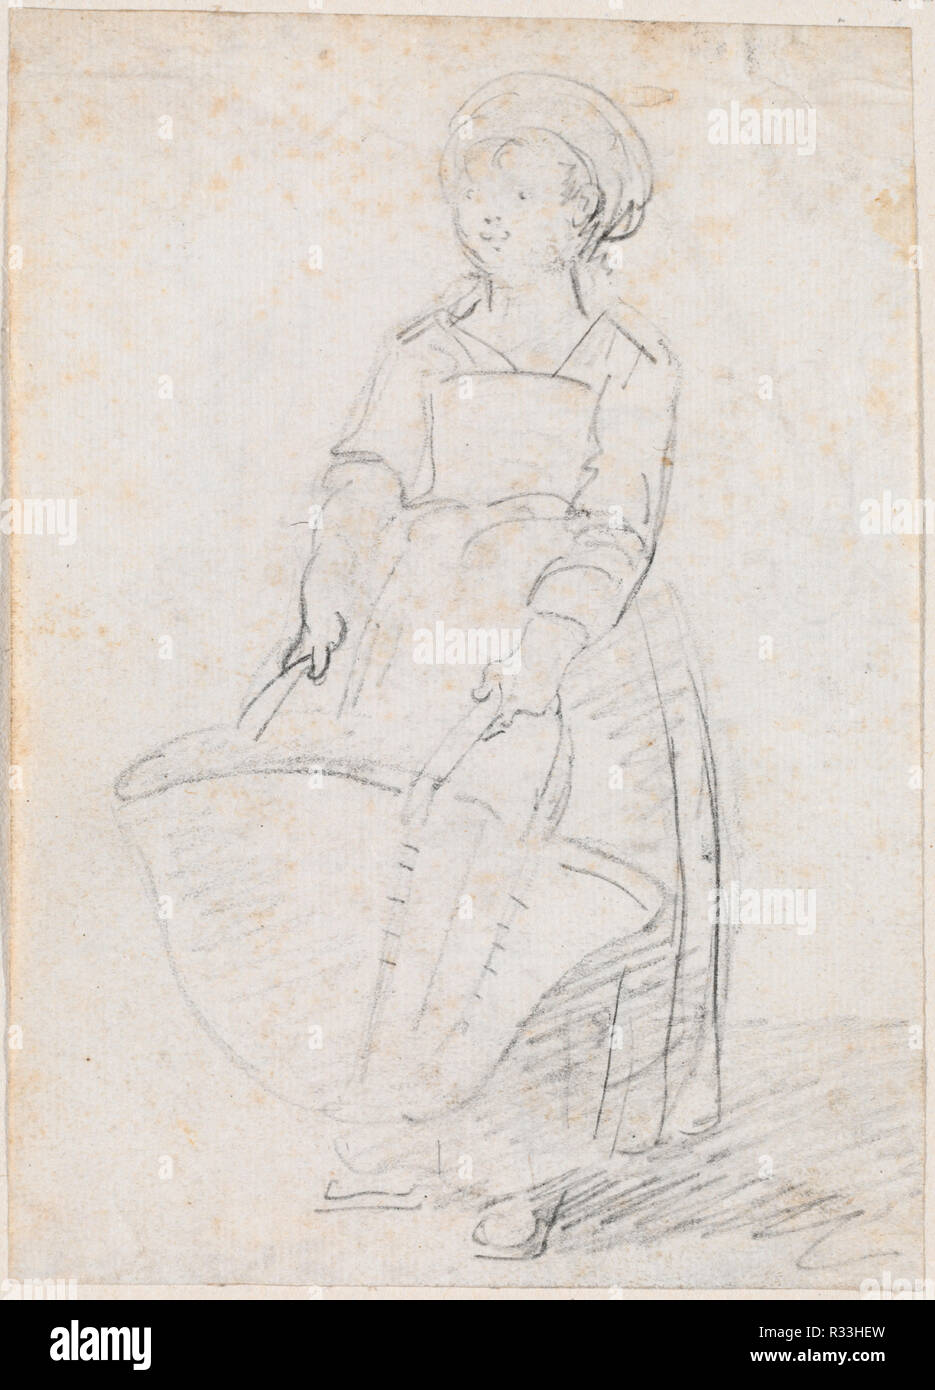 Little Girl with a Large Basket. Dated: probably c. 1754/1765. Dimensions:  Overall: 13.9 x 9.9 cm (5 1/2 x 3 7/8 in.) support: 21.5 x 15.6 cm (8 7/16  x 6 1/8